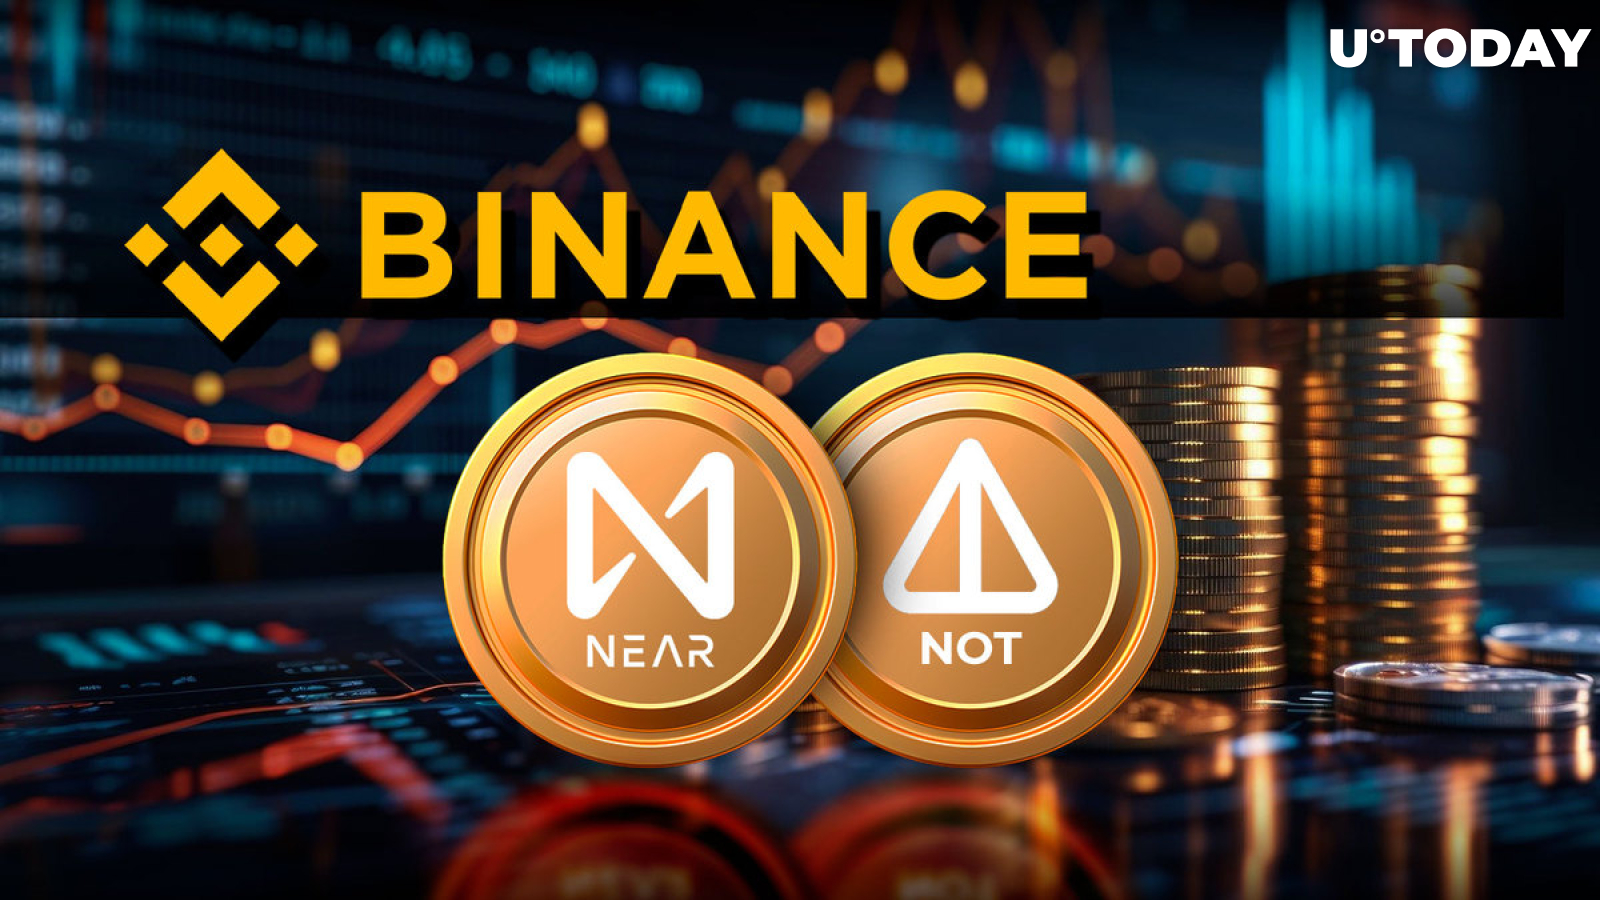 Binance Expands Offerings With NEAR, NOT Pairs